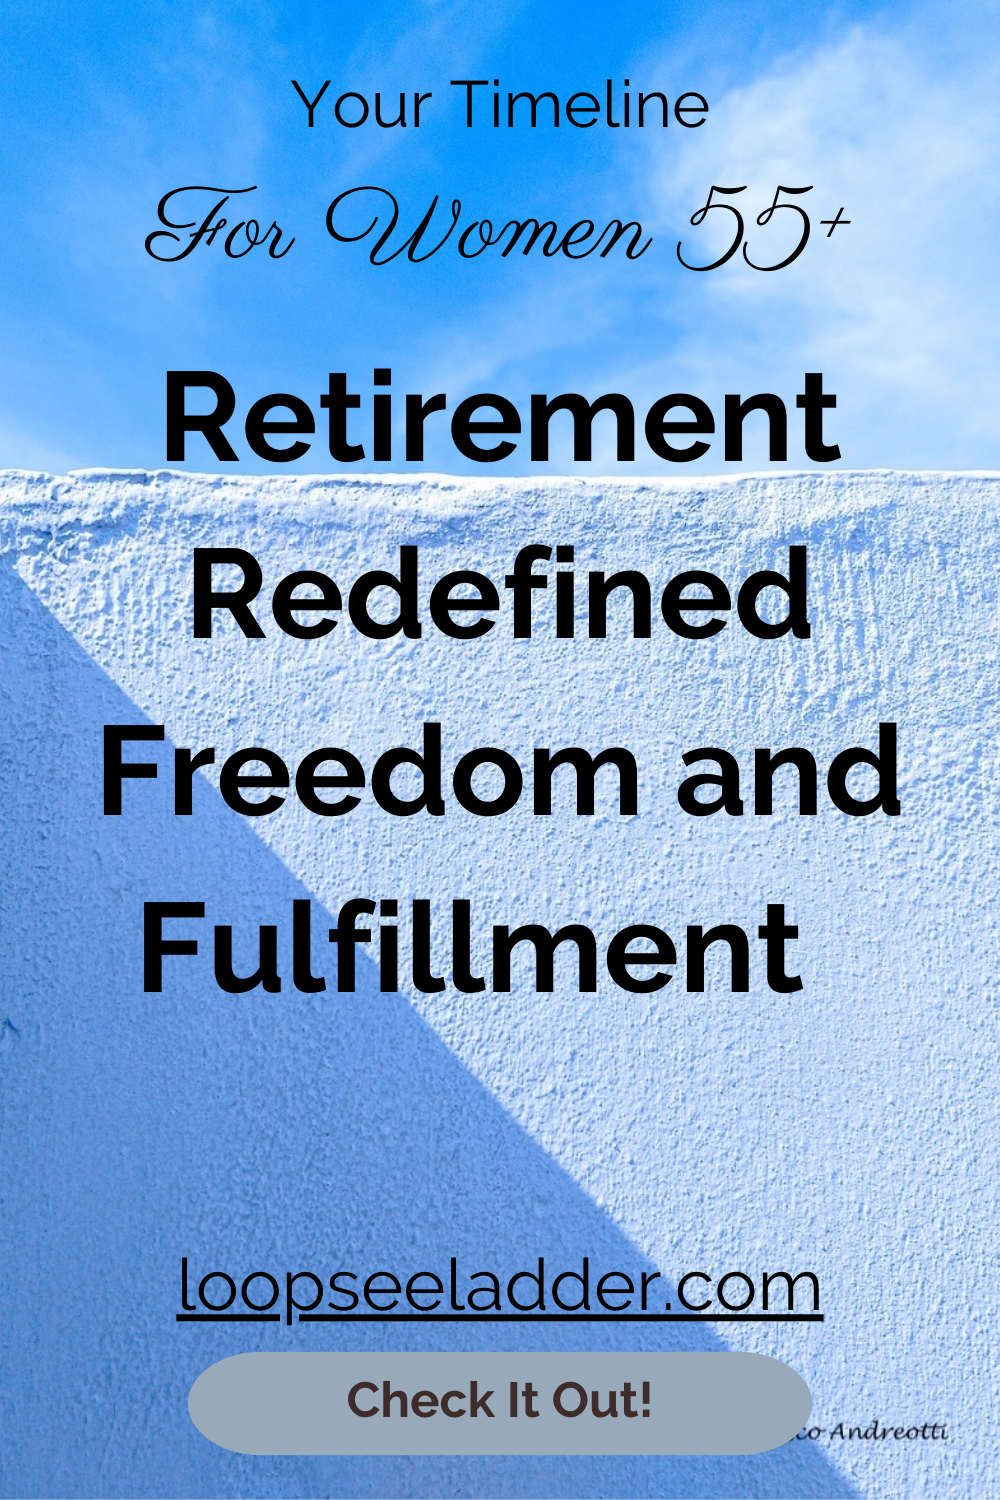 Retirement Redefined: Embracing Freedom and Fulfillment for Women 55+